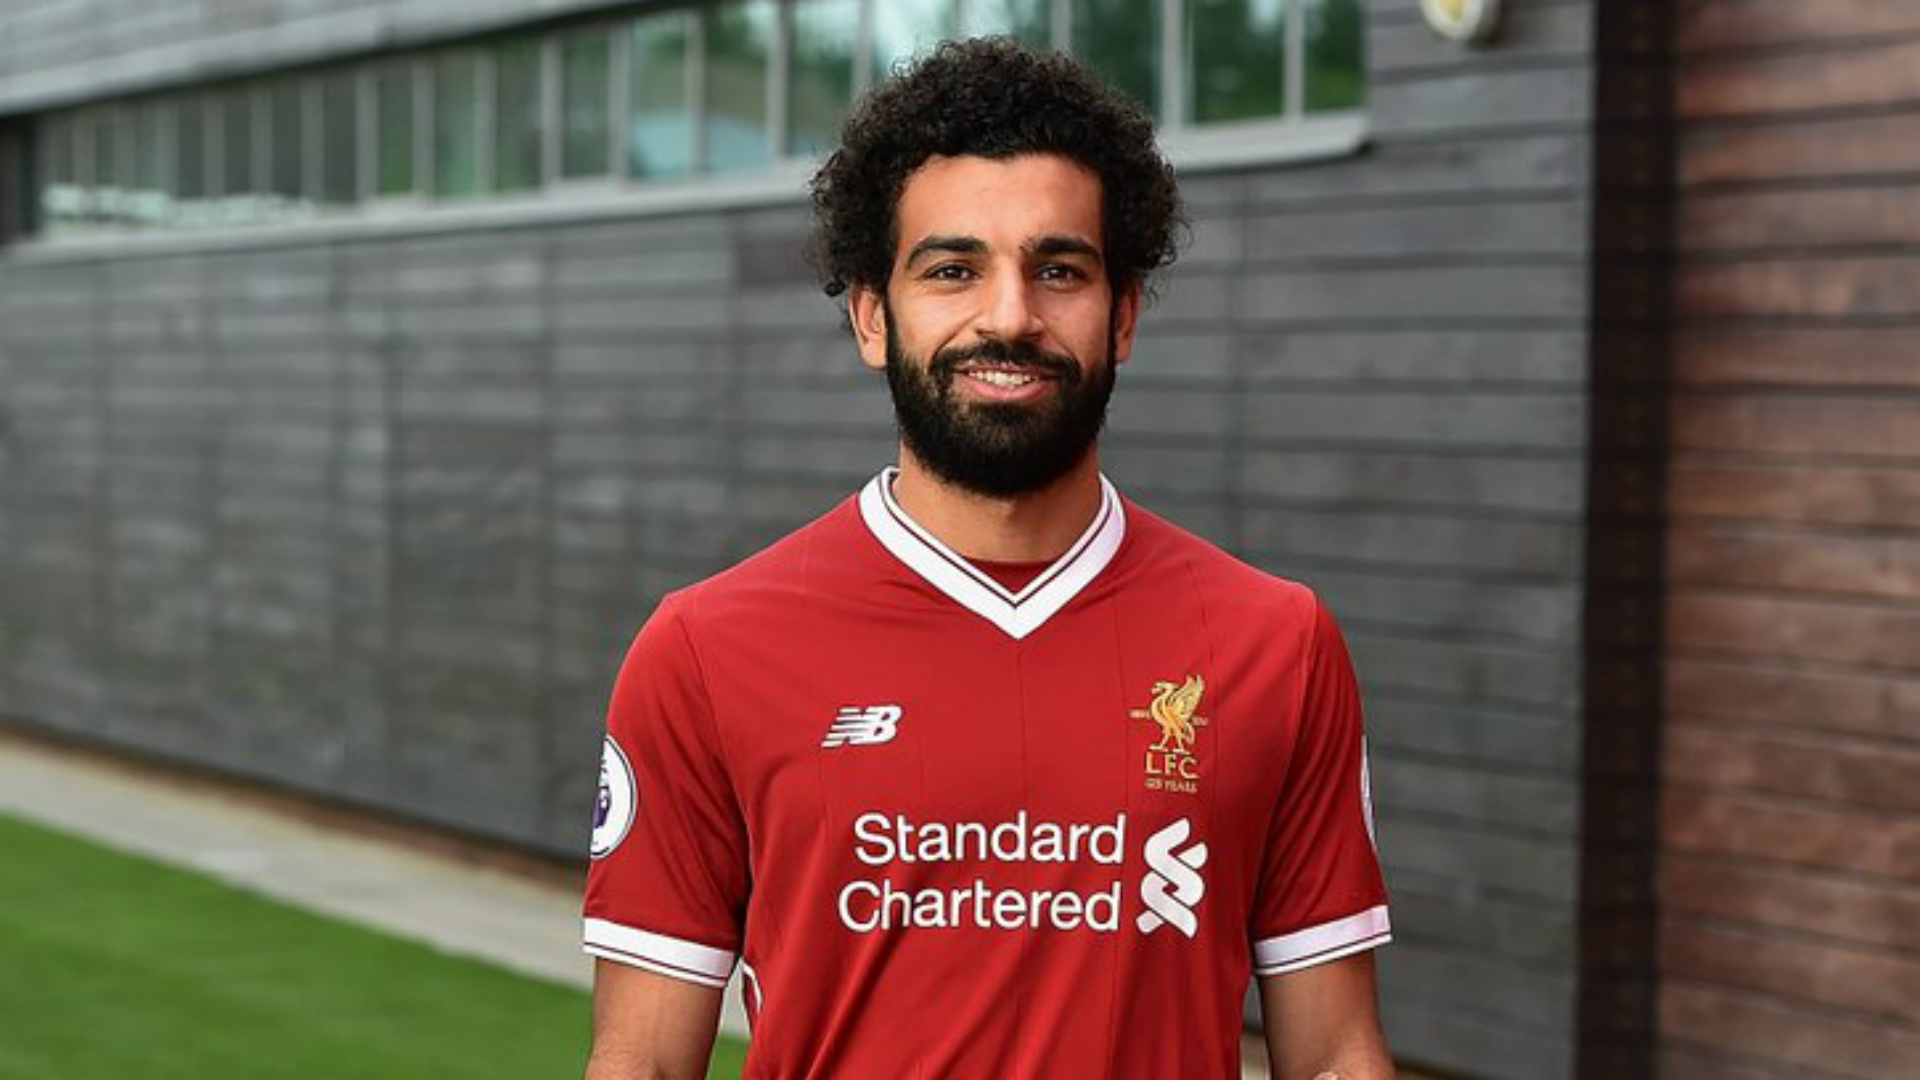 Klopp also says he has recently talked to Salah and that he is excited to join his new club.